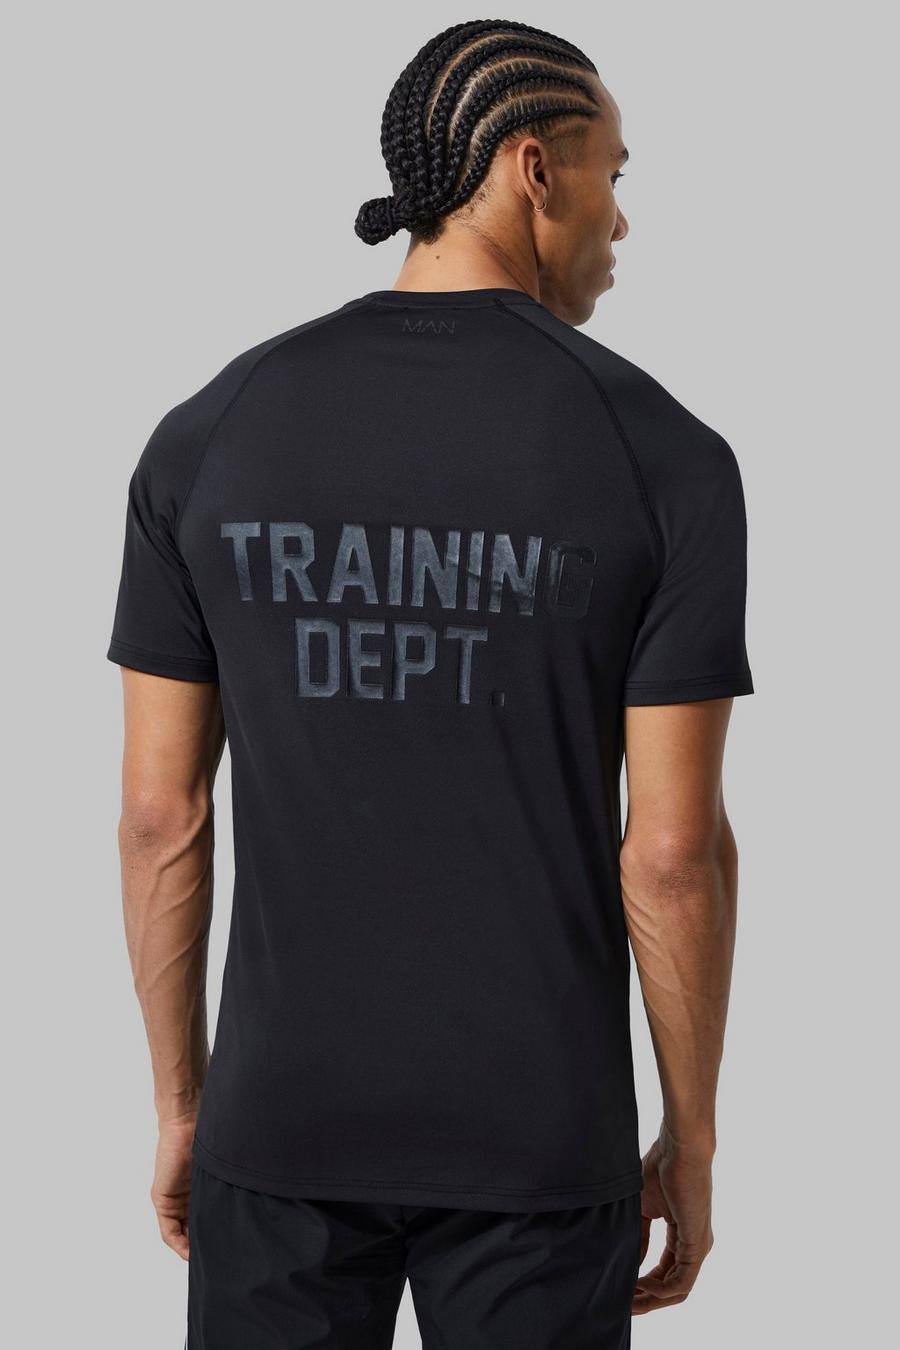 Black Tall Man Active Training Dept Muscle Fit T-shirt image number 1